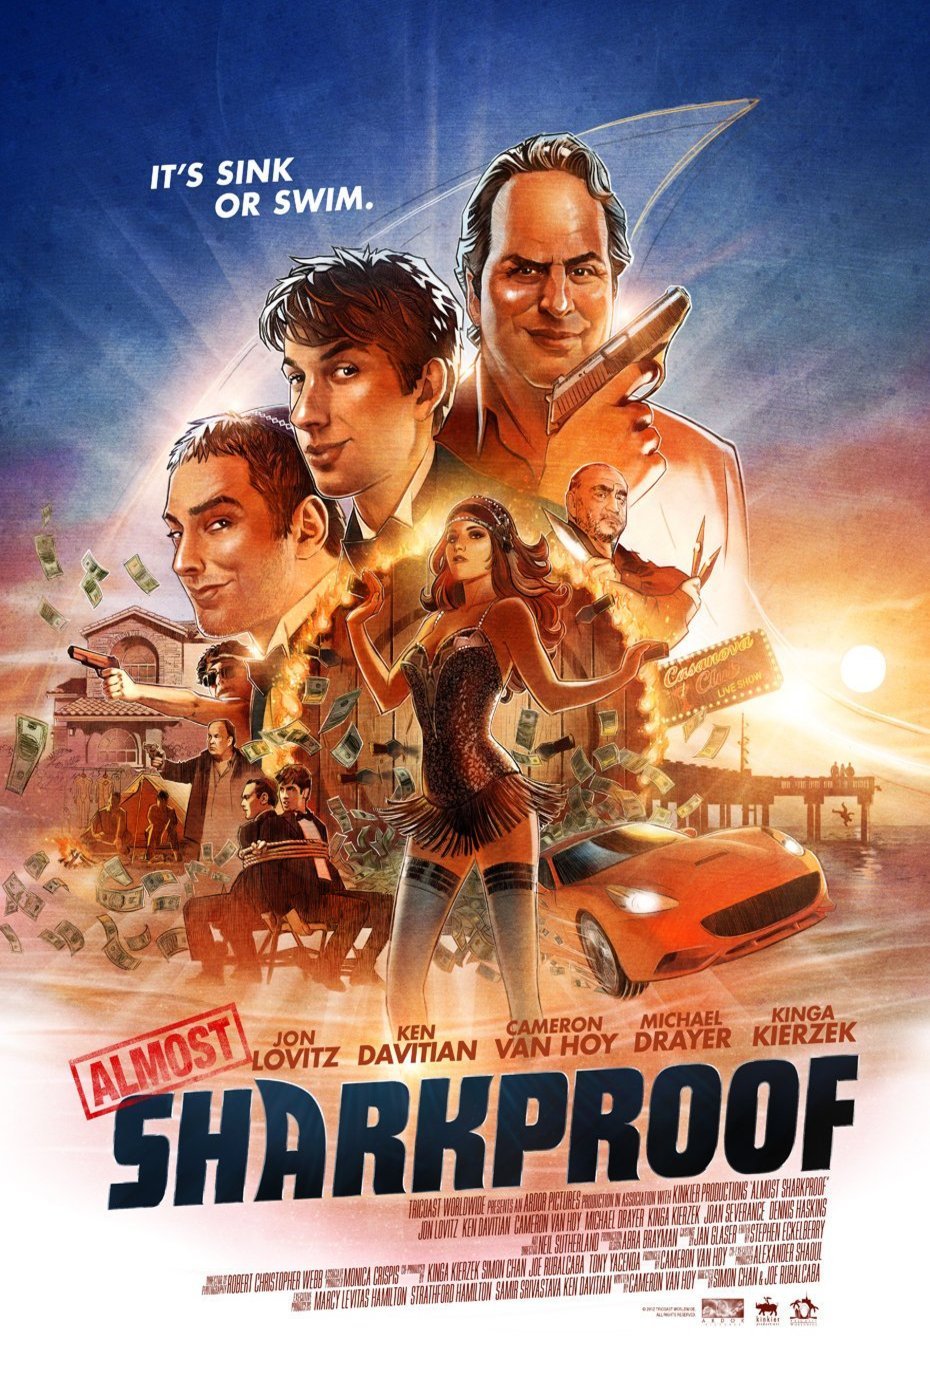 Poster of the movie Sharkproof